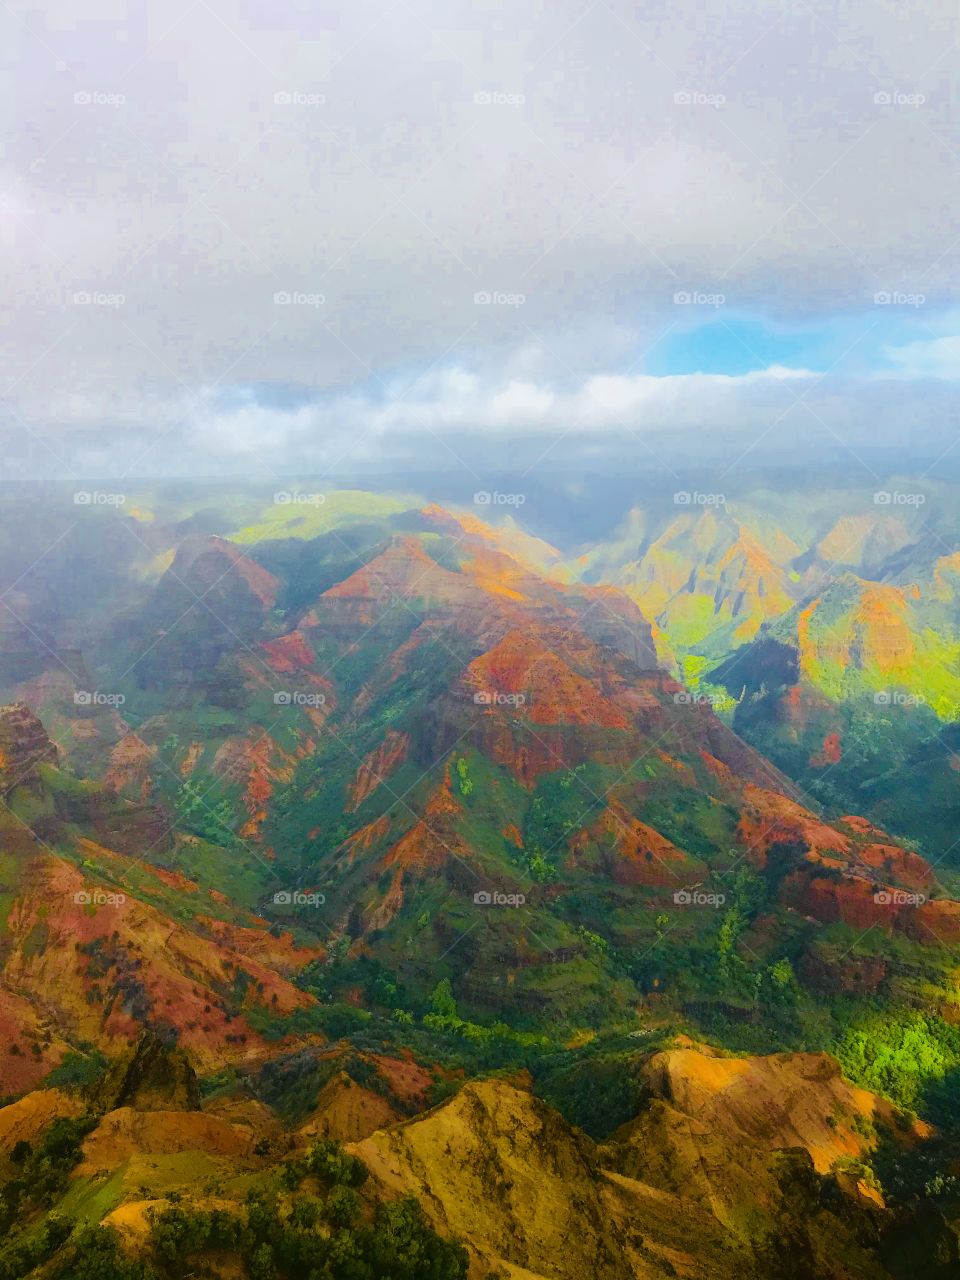 Colors come to life in the mountains of Kauai